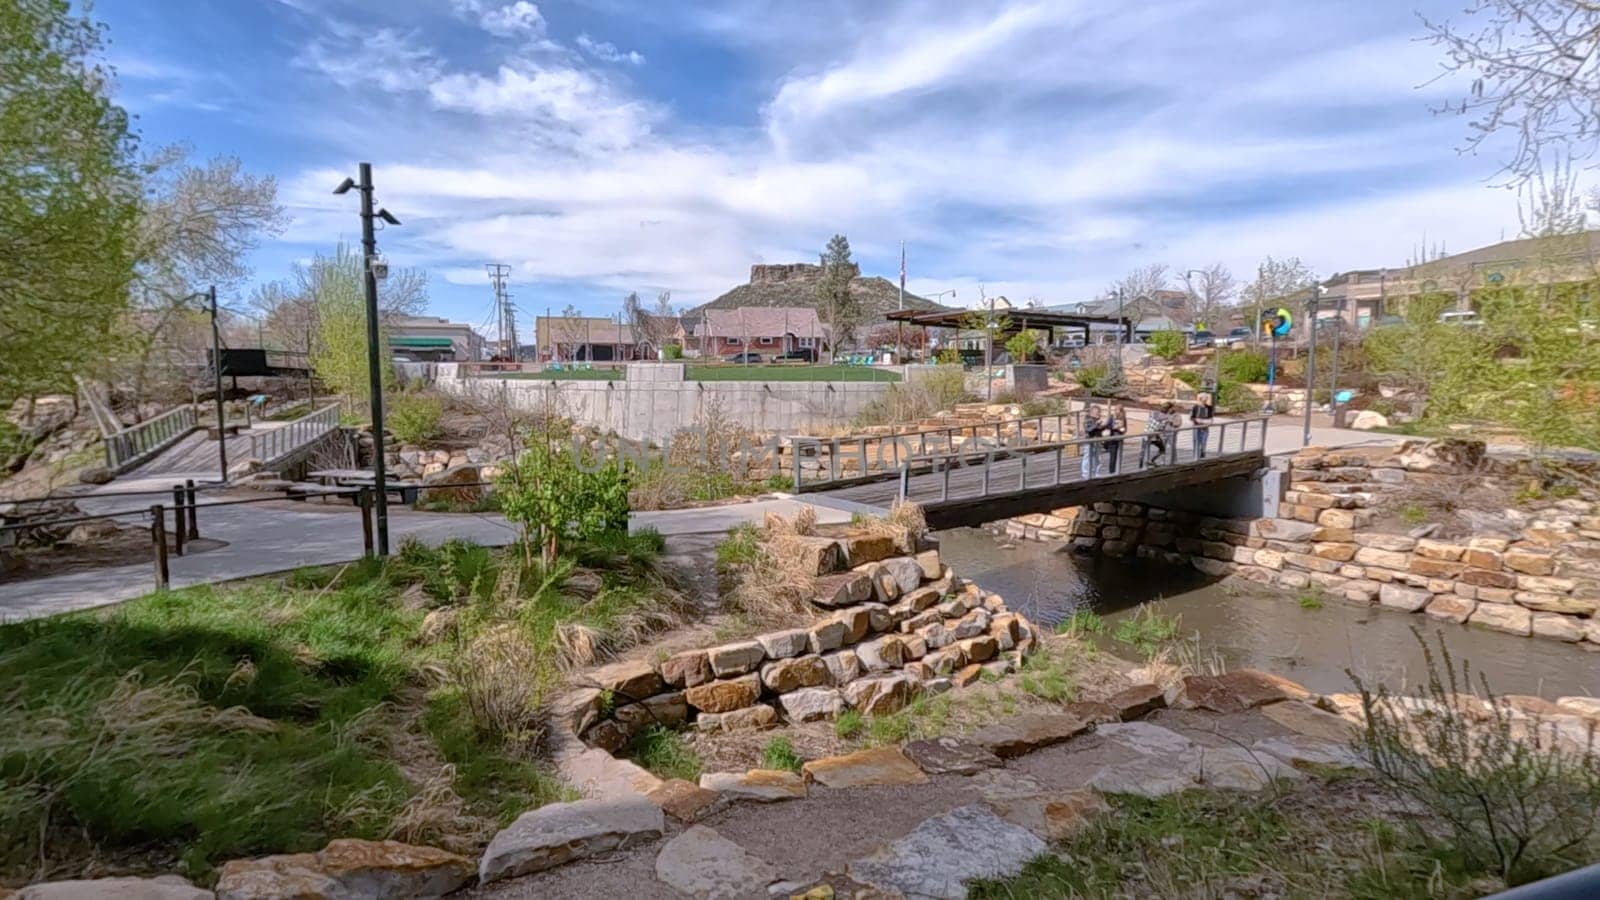 Castle Rock, Colorado, USA-June 12, 2024-Slow motion-A picturesque view of Downtown Castle Rock, Colorado, featuring a serene river flowing through the urban landscape. The scene includes a charming bridge, lush greenery, and modern buildings in the background under a bright blue sky with scattered clouds. The blend of nature and urban development highlights the unique character of this vibrant community.